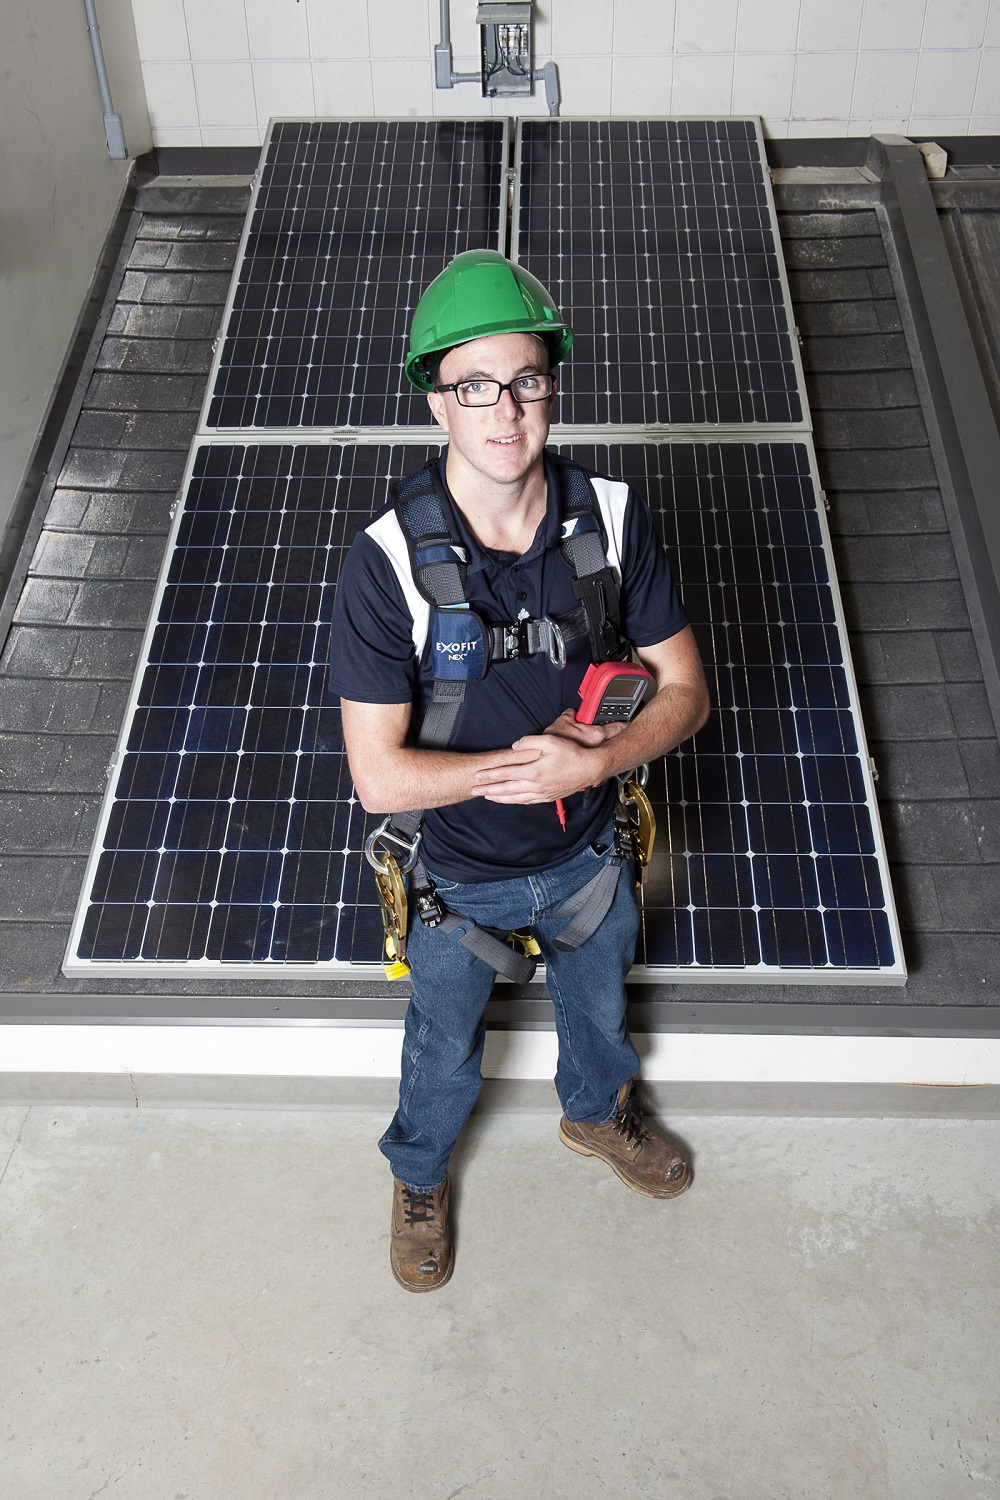 Student and solar panel